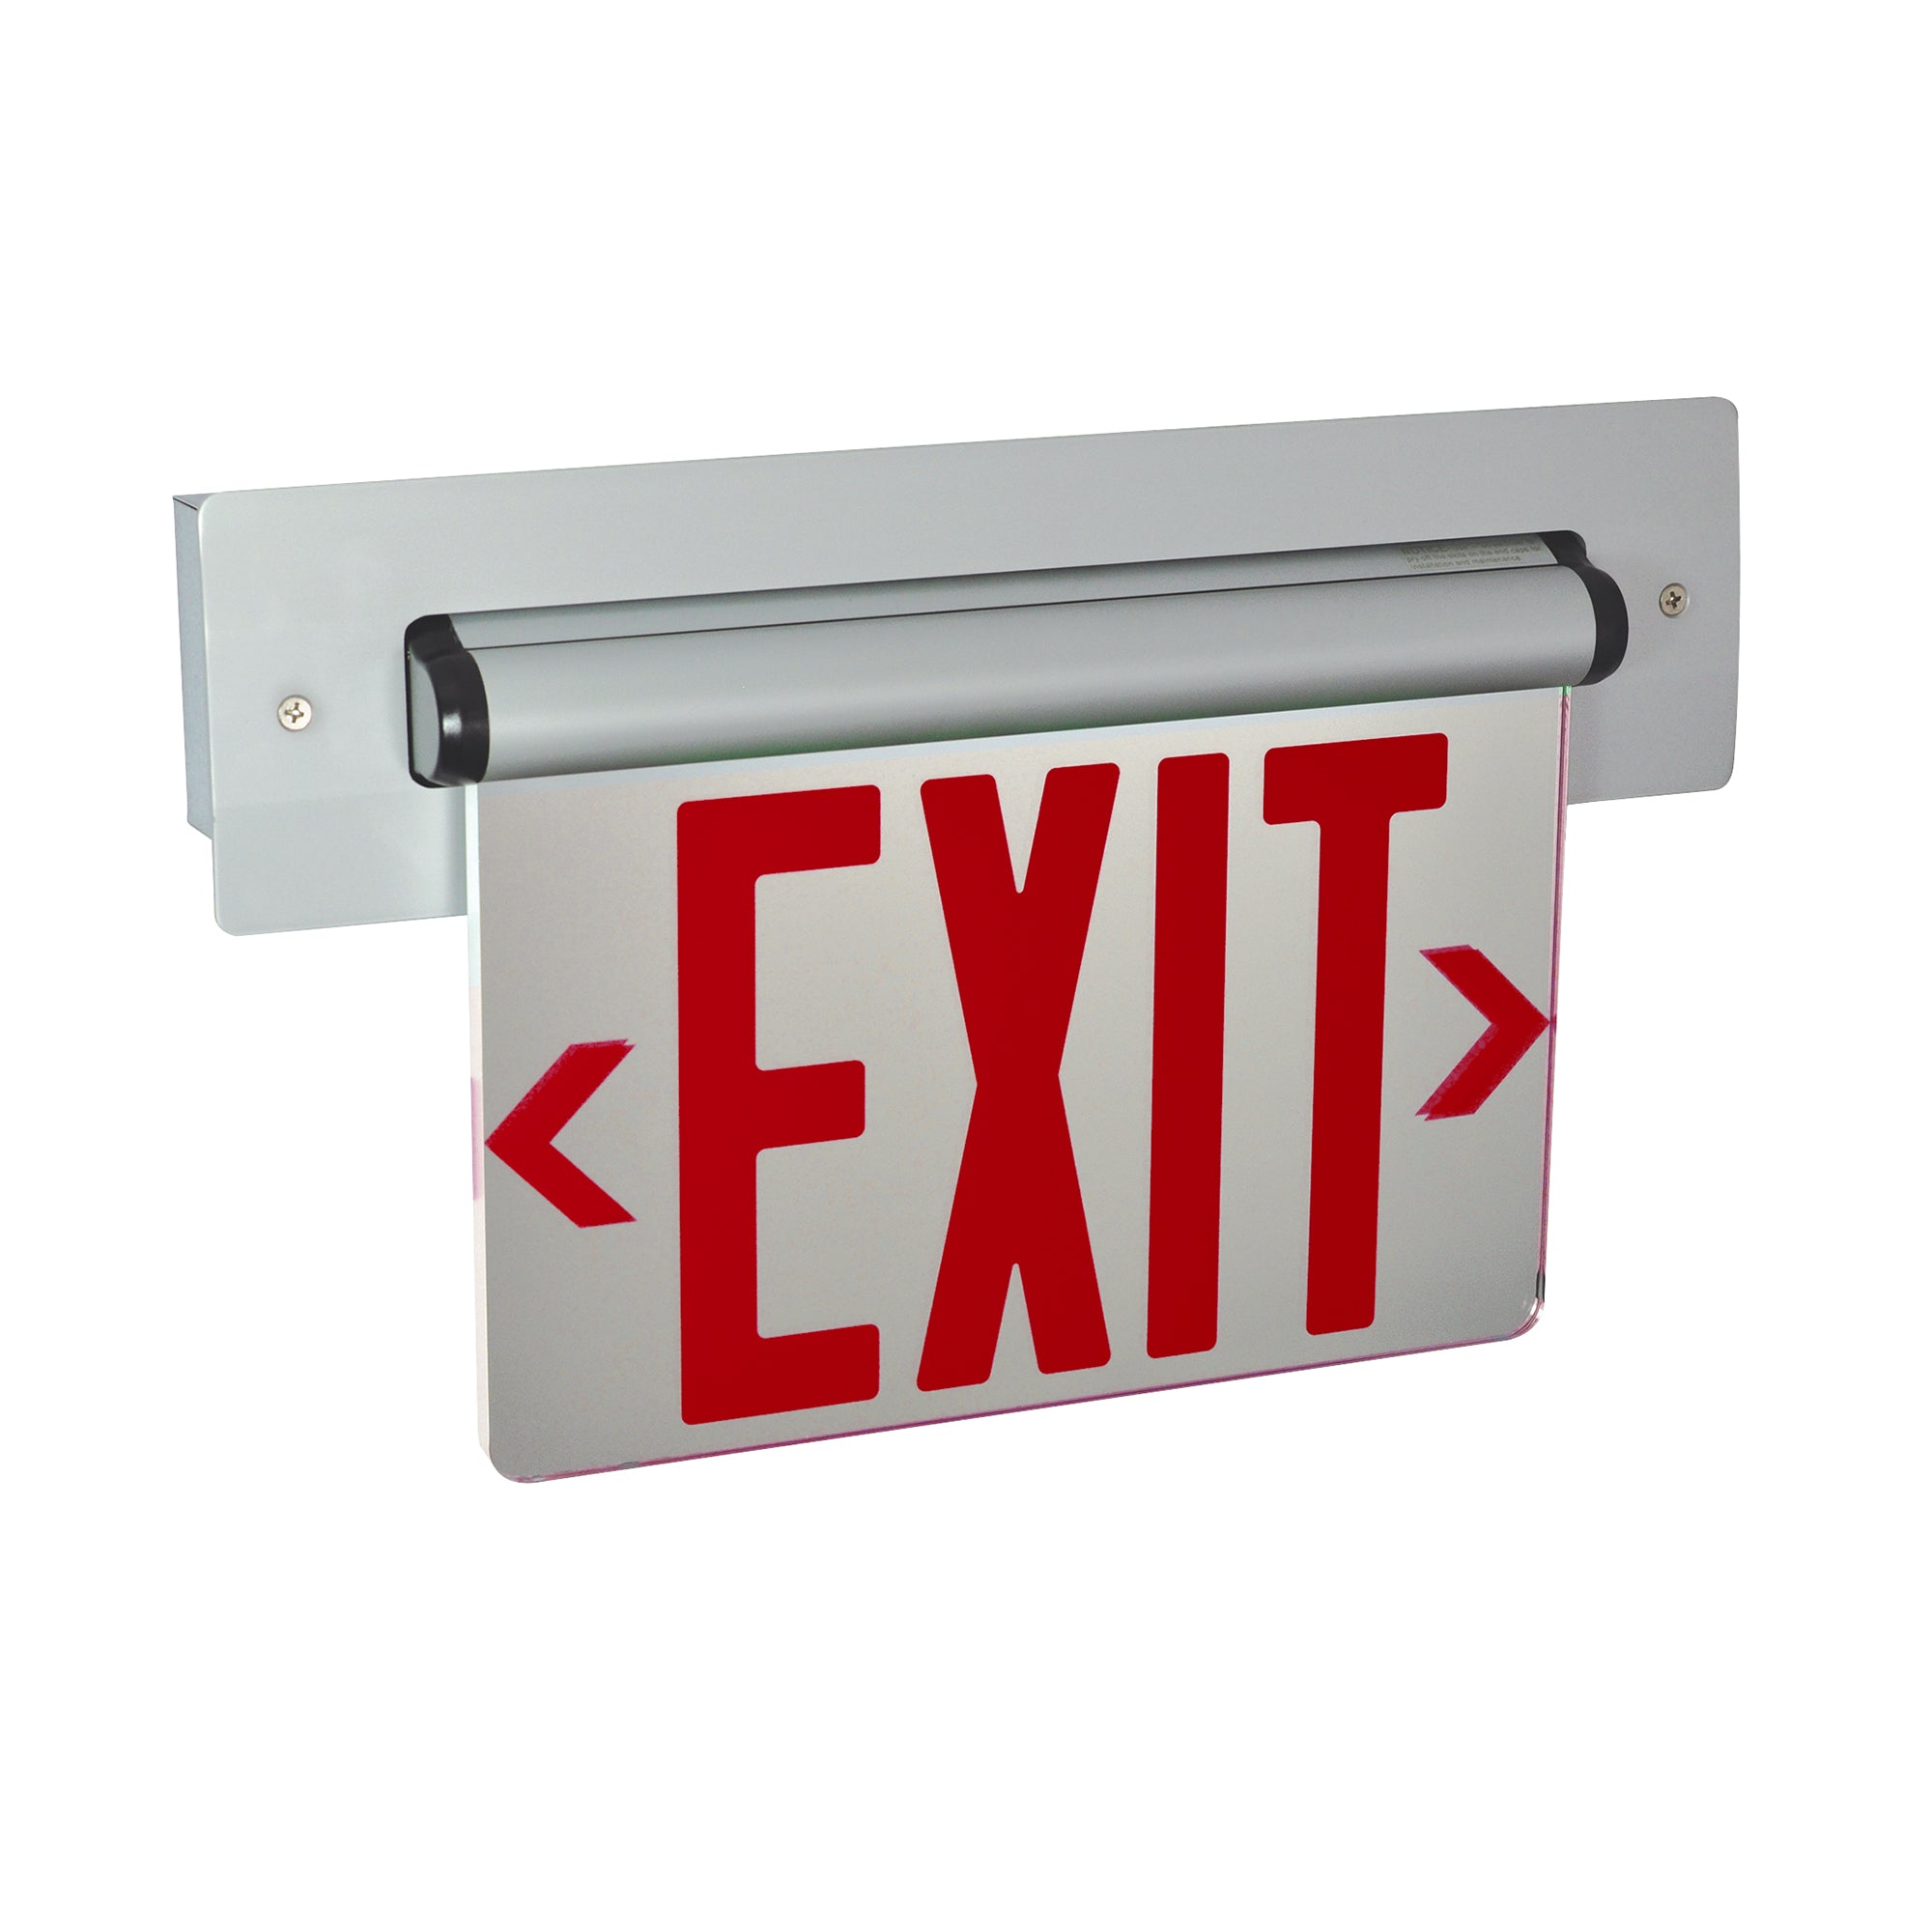 Nora Lighting NX-815-LEDRMW - Exit / Emergency - Recessed Adjustable LED Edge-Lit Exit Sign, Battery Backup, 6 Inch Red Letters, Single Face / Mirrored Acrylic, White Housing